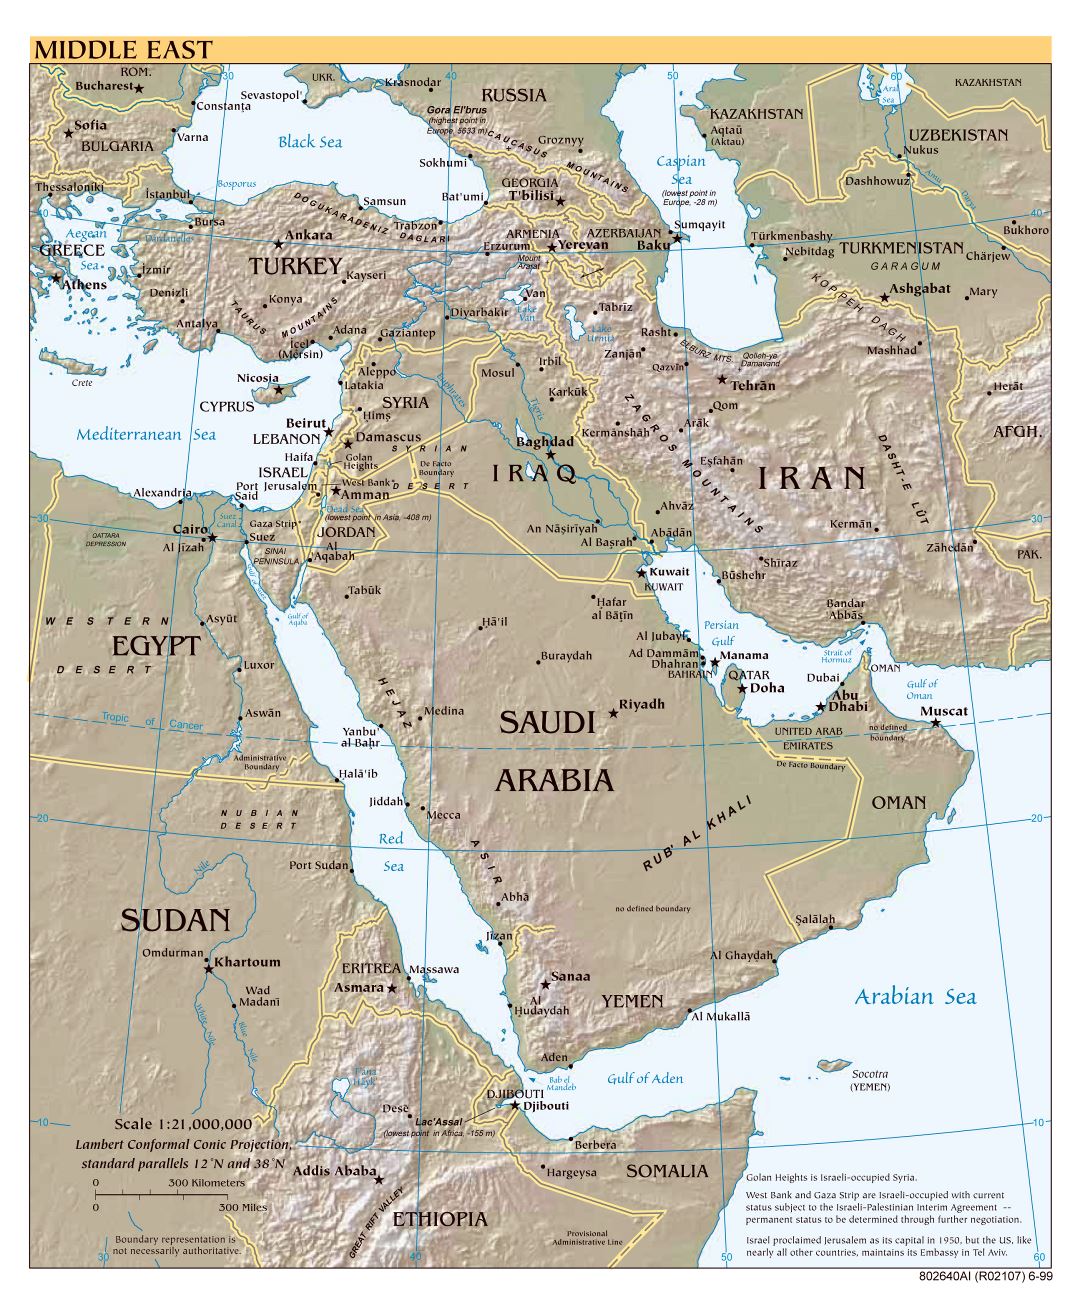 Large scale political map of the Middle East with relief, major cities and capitals - 1999